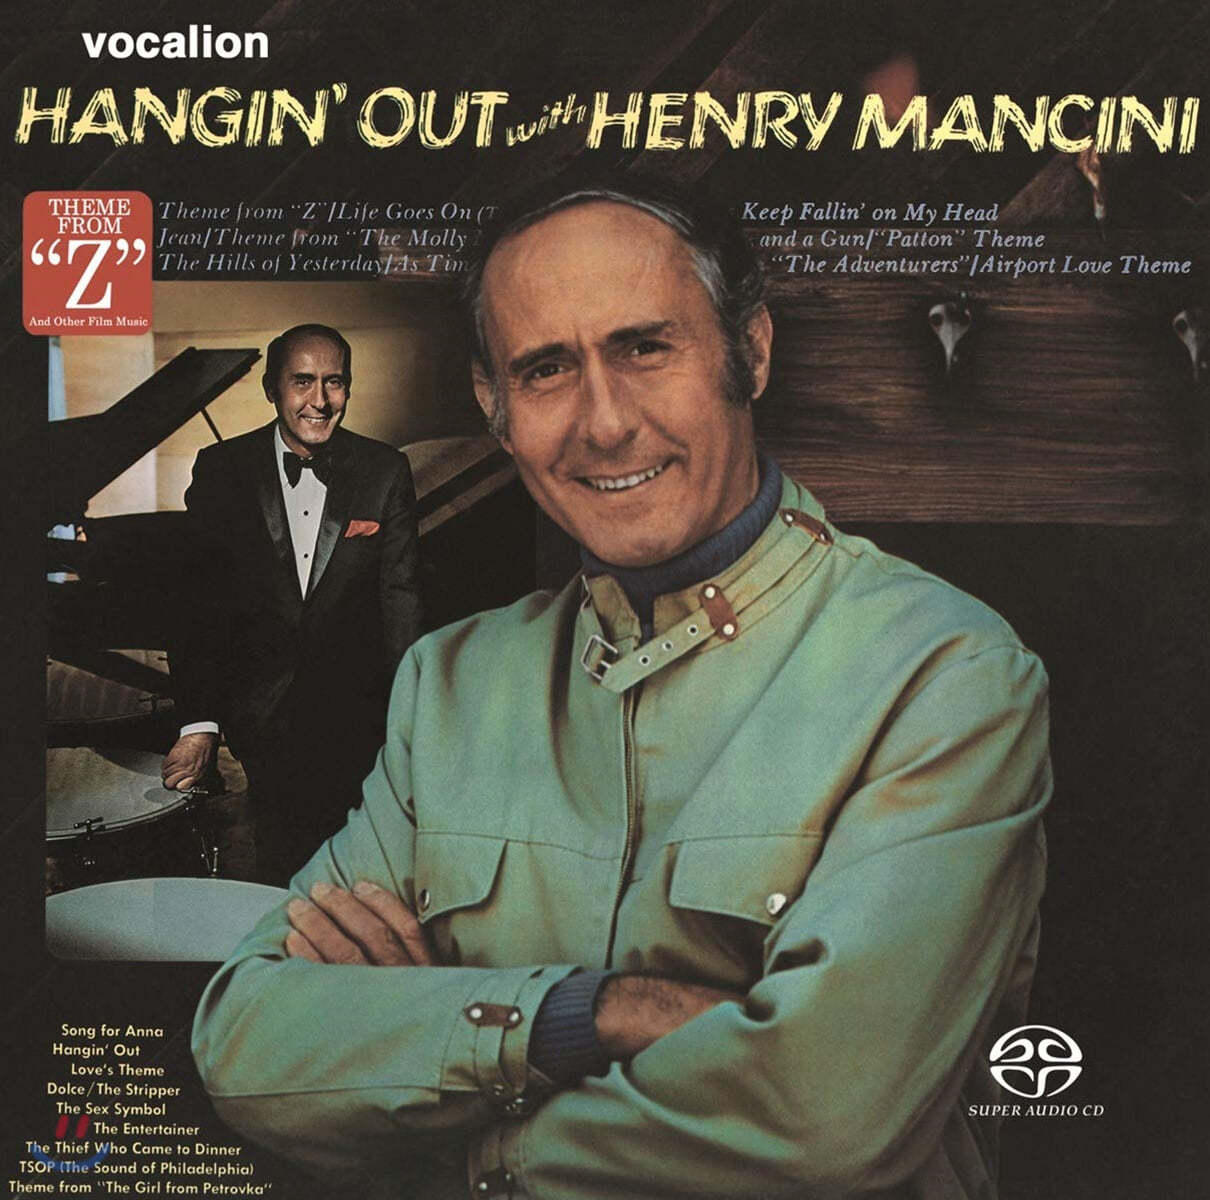 Henry Mancini (헨리 맨시니) - Hangin&#39; Out with Henry Mancini &amp; Theme from &quot;&quot;Z&quot;&quot; and Other Film Music (Original Analog Remastered)